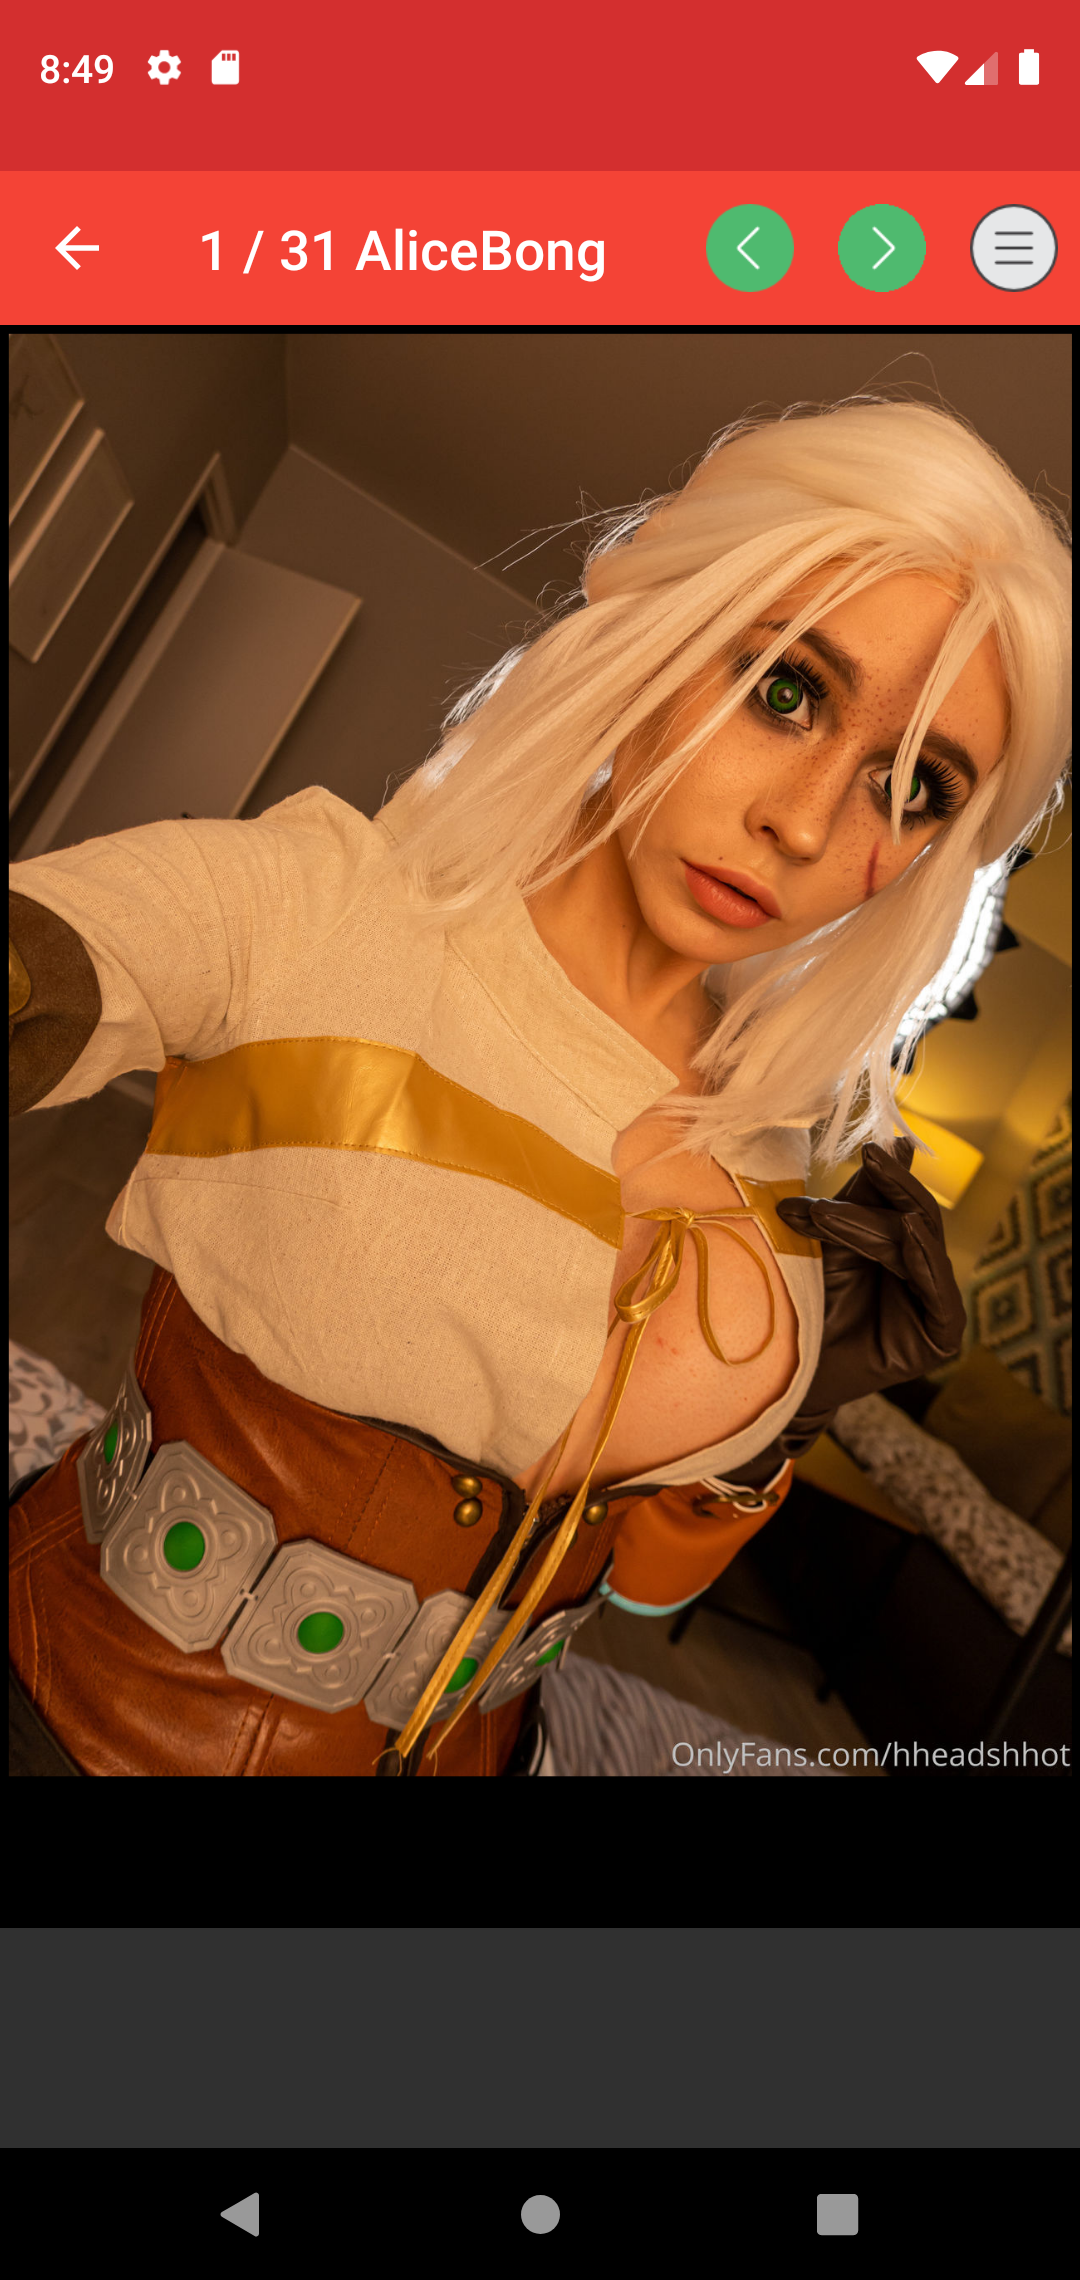 Witcher Cosplays anime,witcher,manga,aletta,erotic,pornstar,galleries,apk,hentai,where,cosplay,apps,hot,hentia,android,pics,live,sexy,porn,download,wallpaper,comics,adult,ocean,app,kristinf